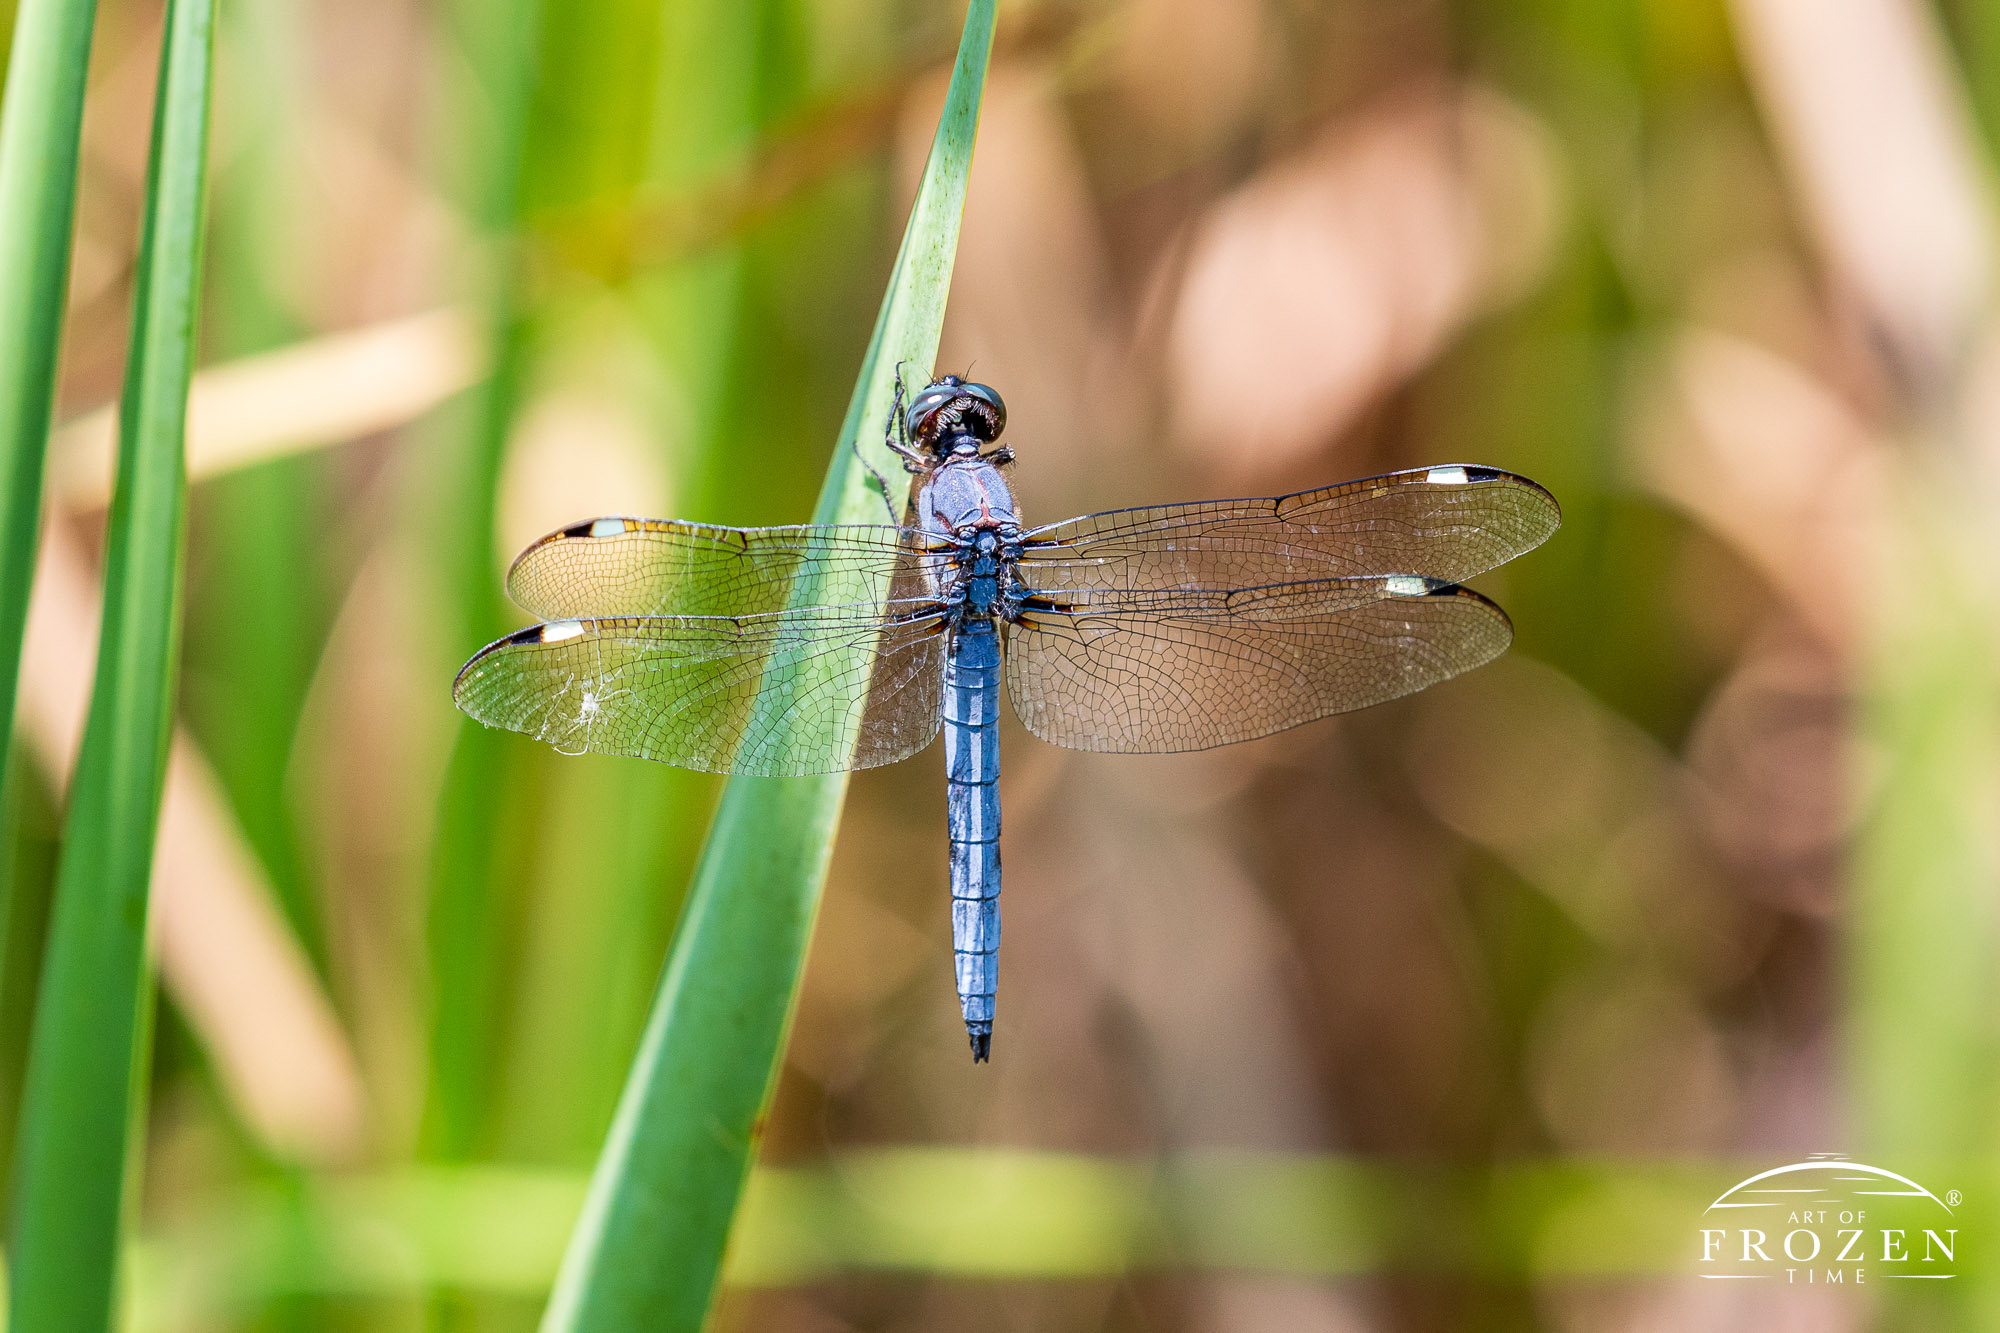 An eastern pondhawk dragonfly clinging to a plant where the blue abdomen colors indicates its a male dragonfly